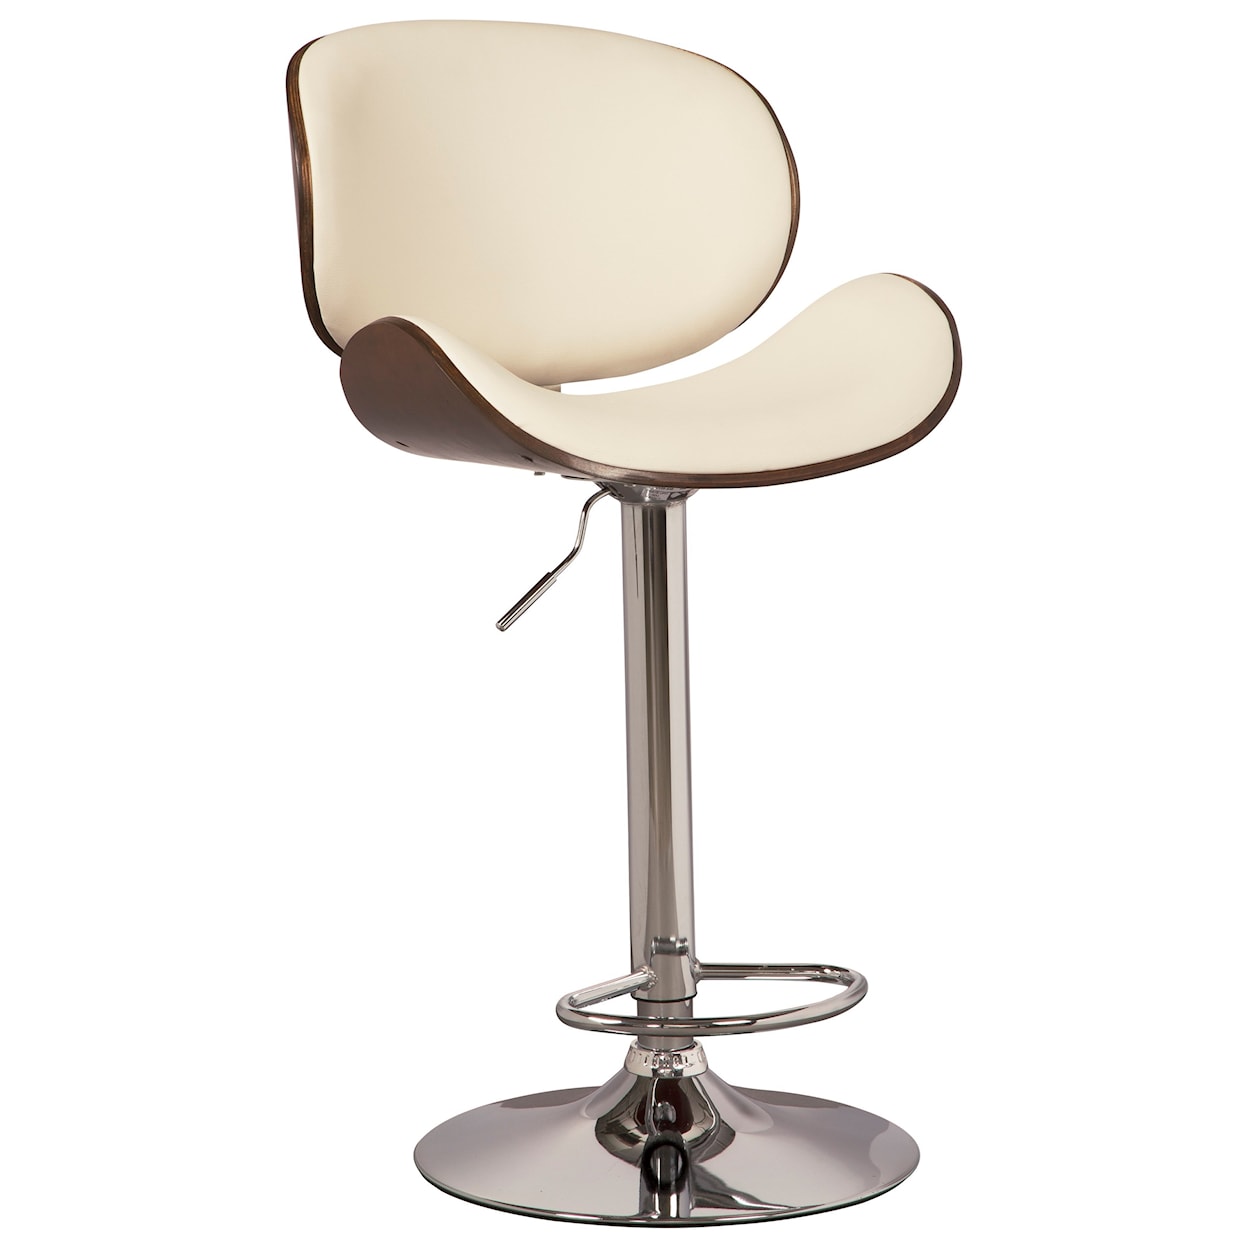 Signature Design by Ashley Furniture Bellatier Tall Upholstered Swivel Barstool